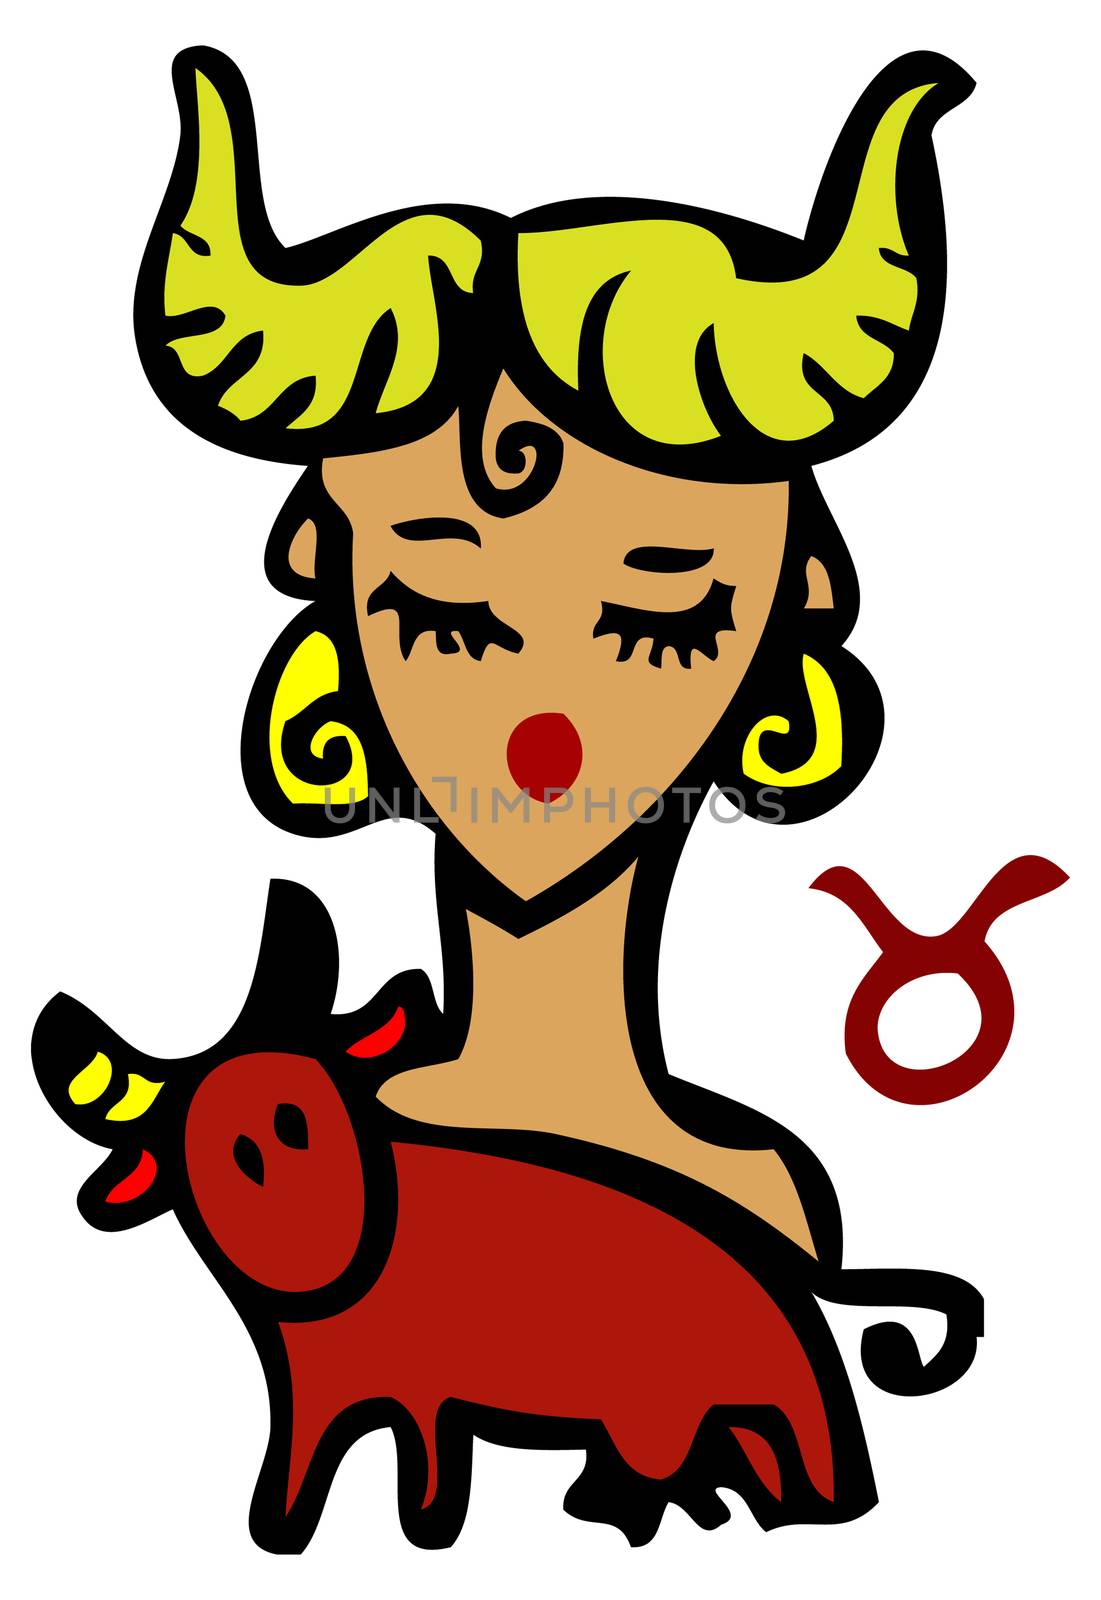 Zodiac signs, icons - taurus, Beauty Woman with cow, bull symbol by IconsJewelry